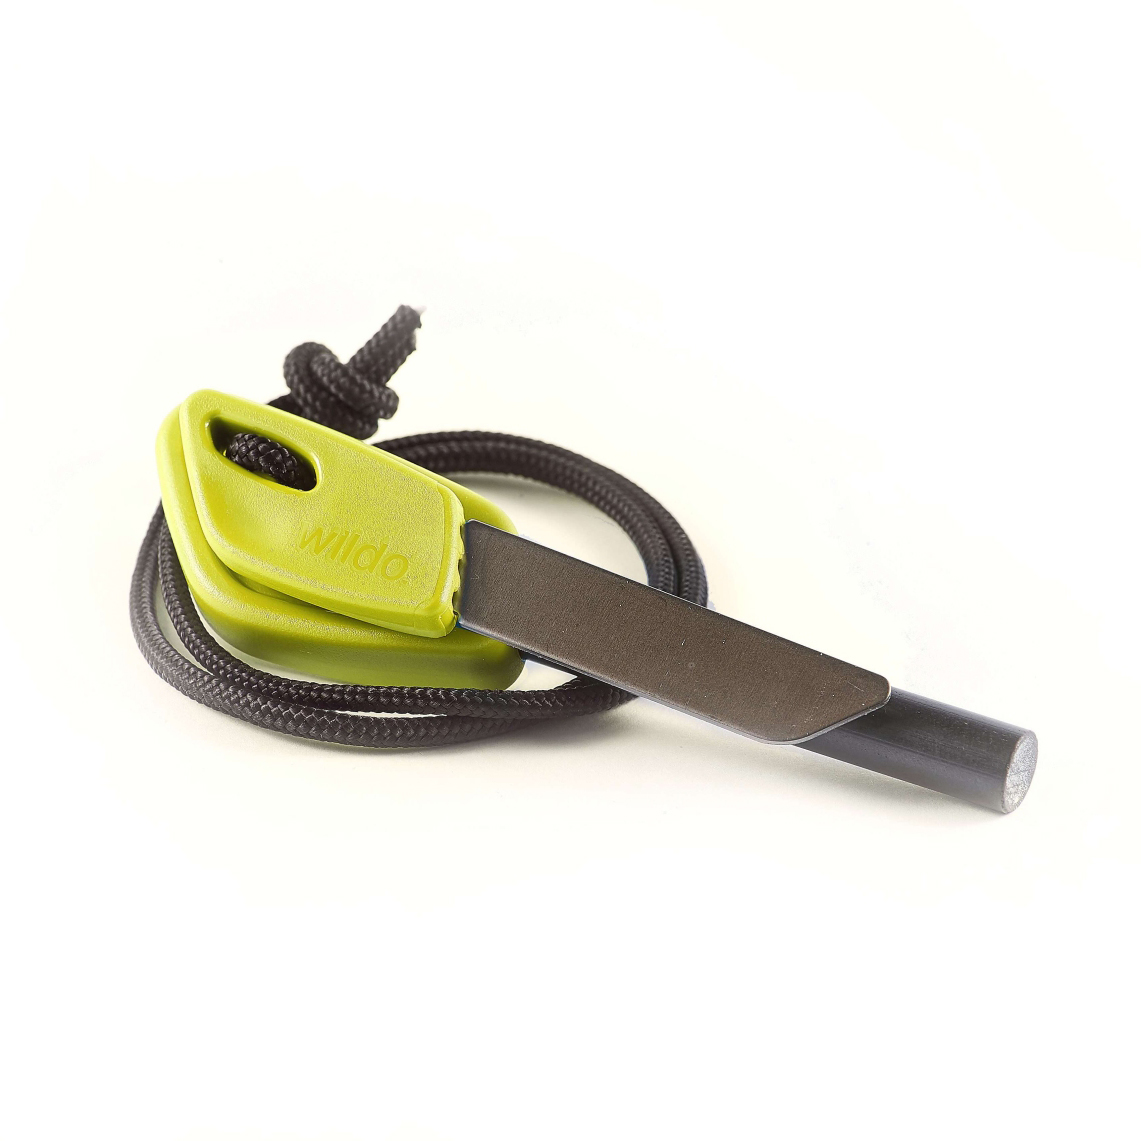 Picture of Wildo Fire Flash Pro Large Fire Steel - lime